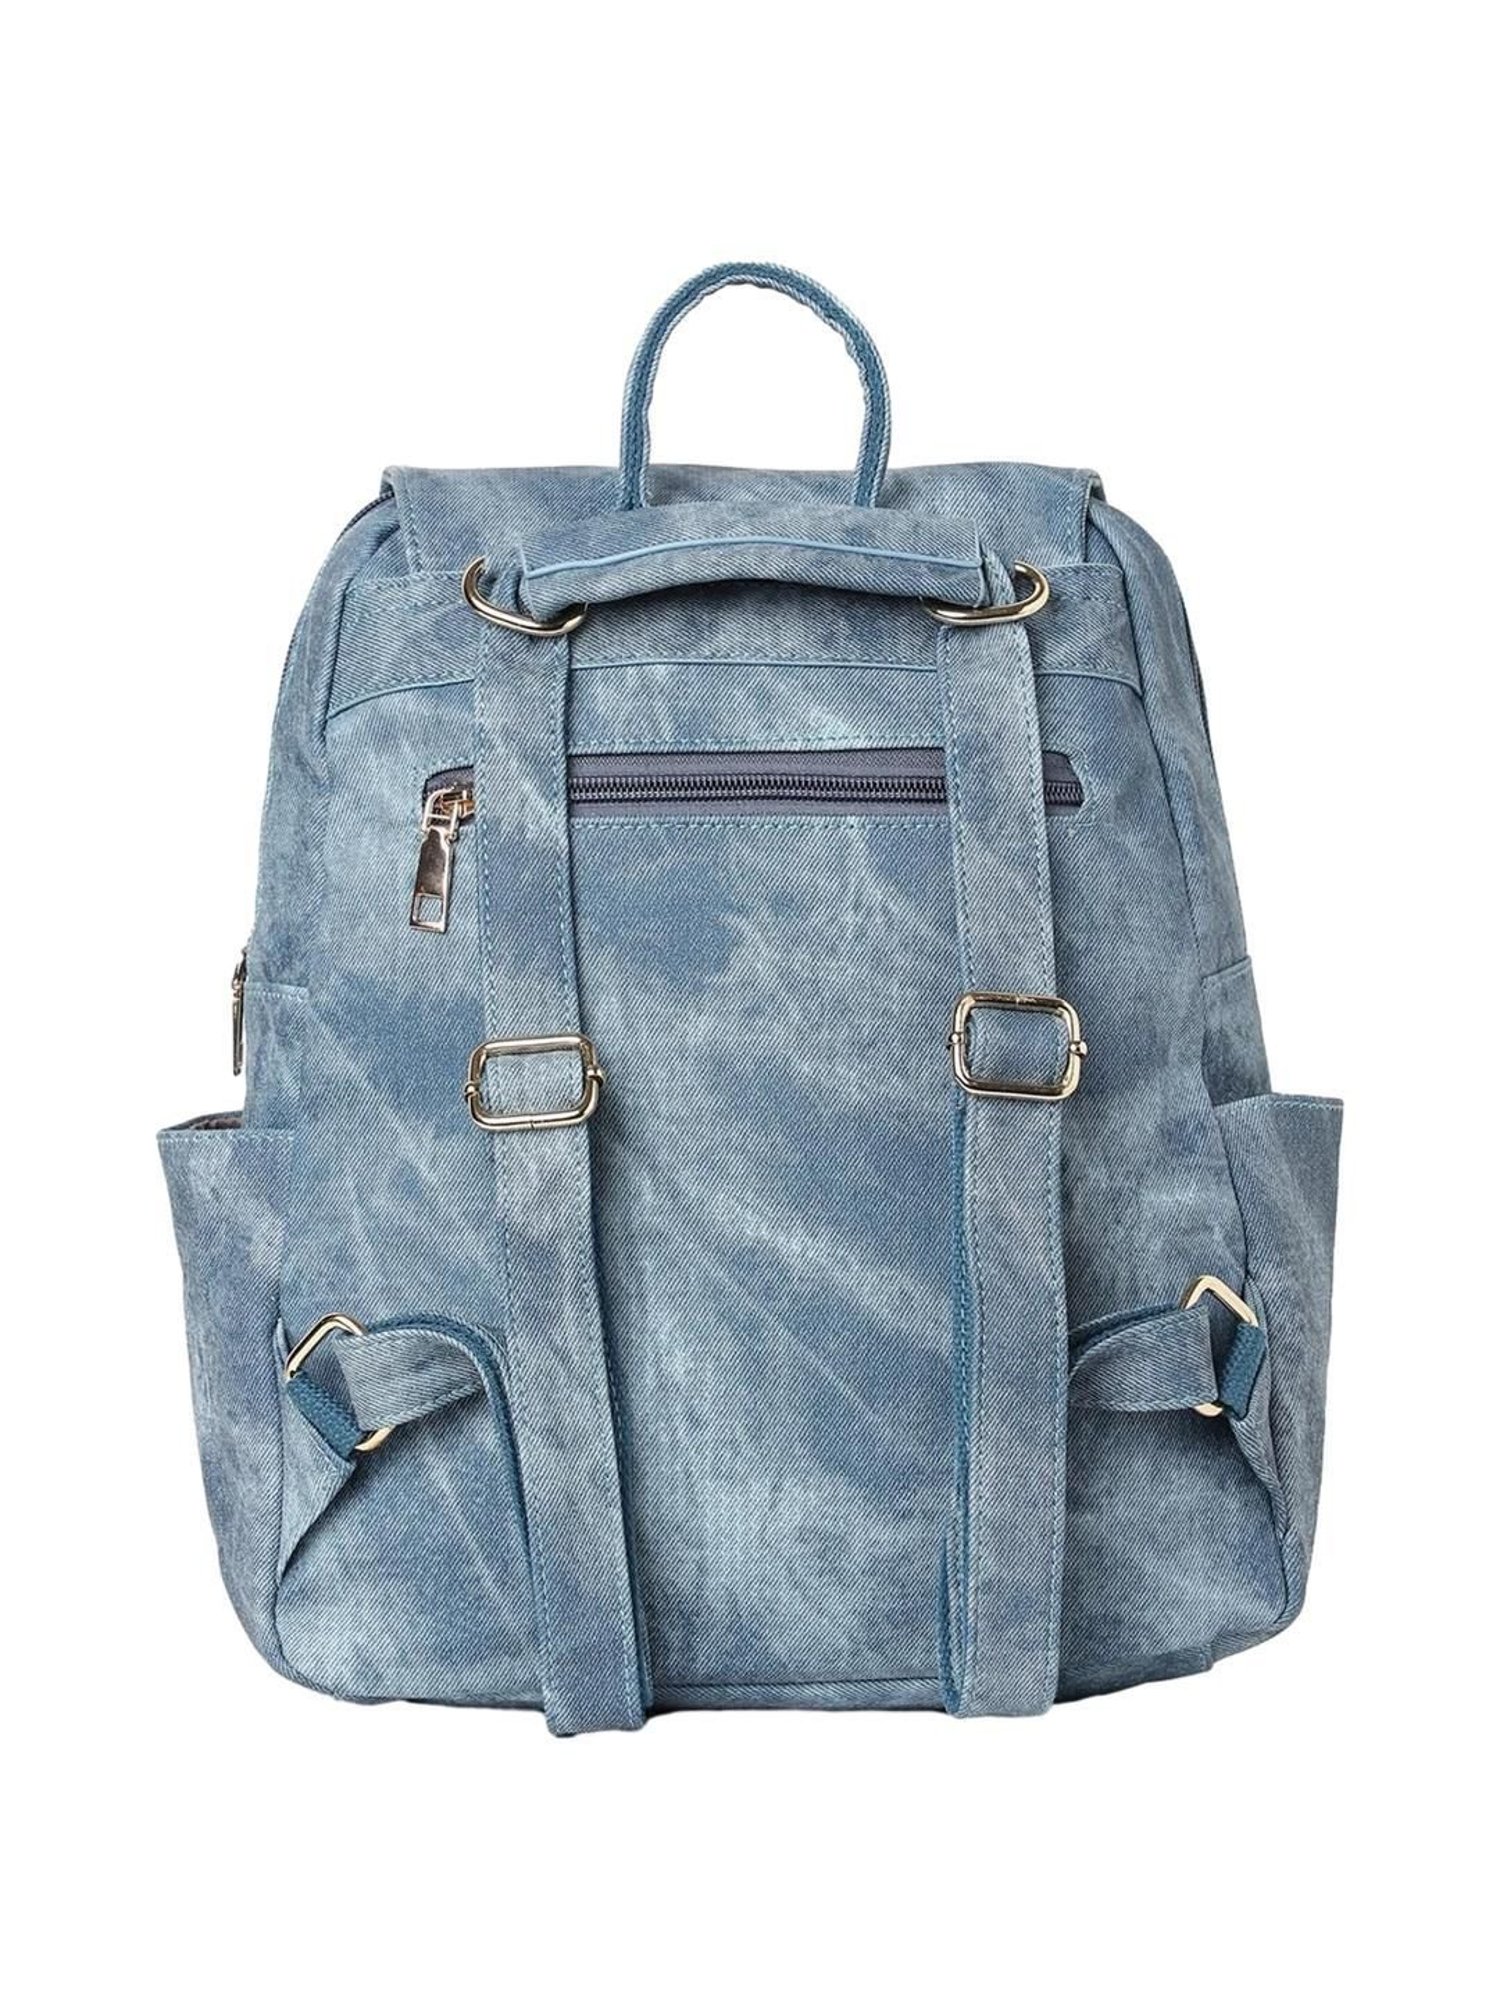 Upcycled Patched Denim & Felt Jeans Travel Backpack